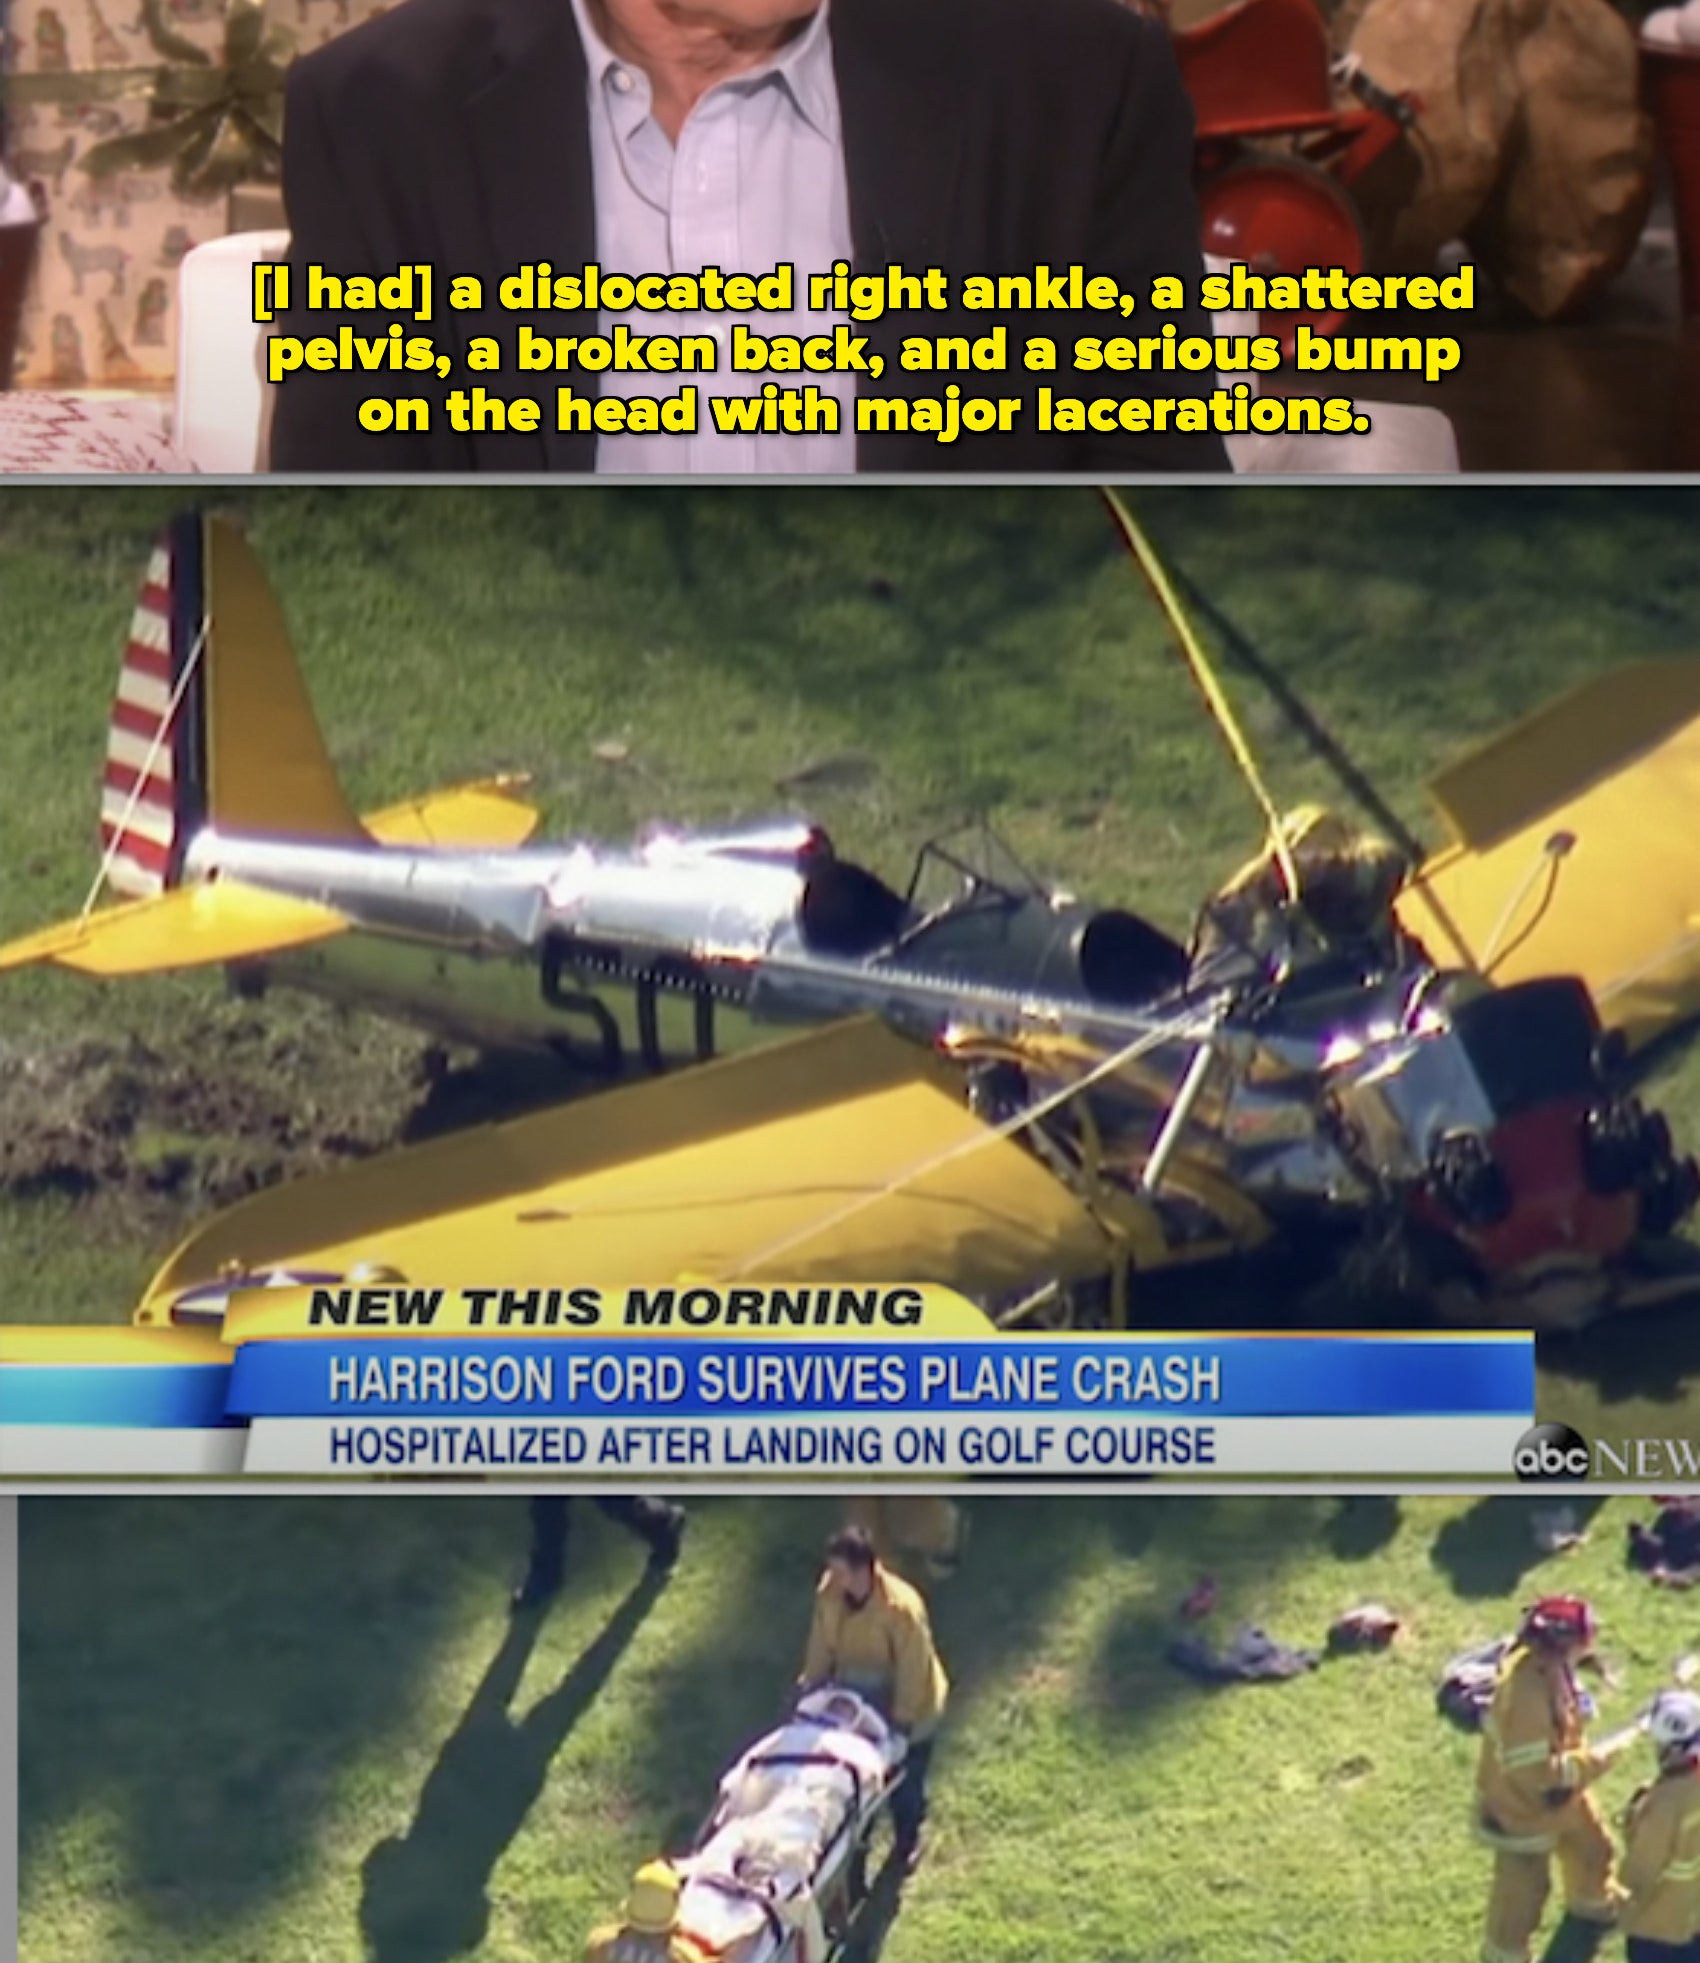 Harrison Ford being interviewed by Ellen DeGeneres, plus screenshots from news coverage of his crash and being carried away on a stretcher